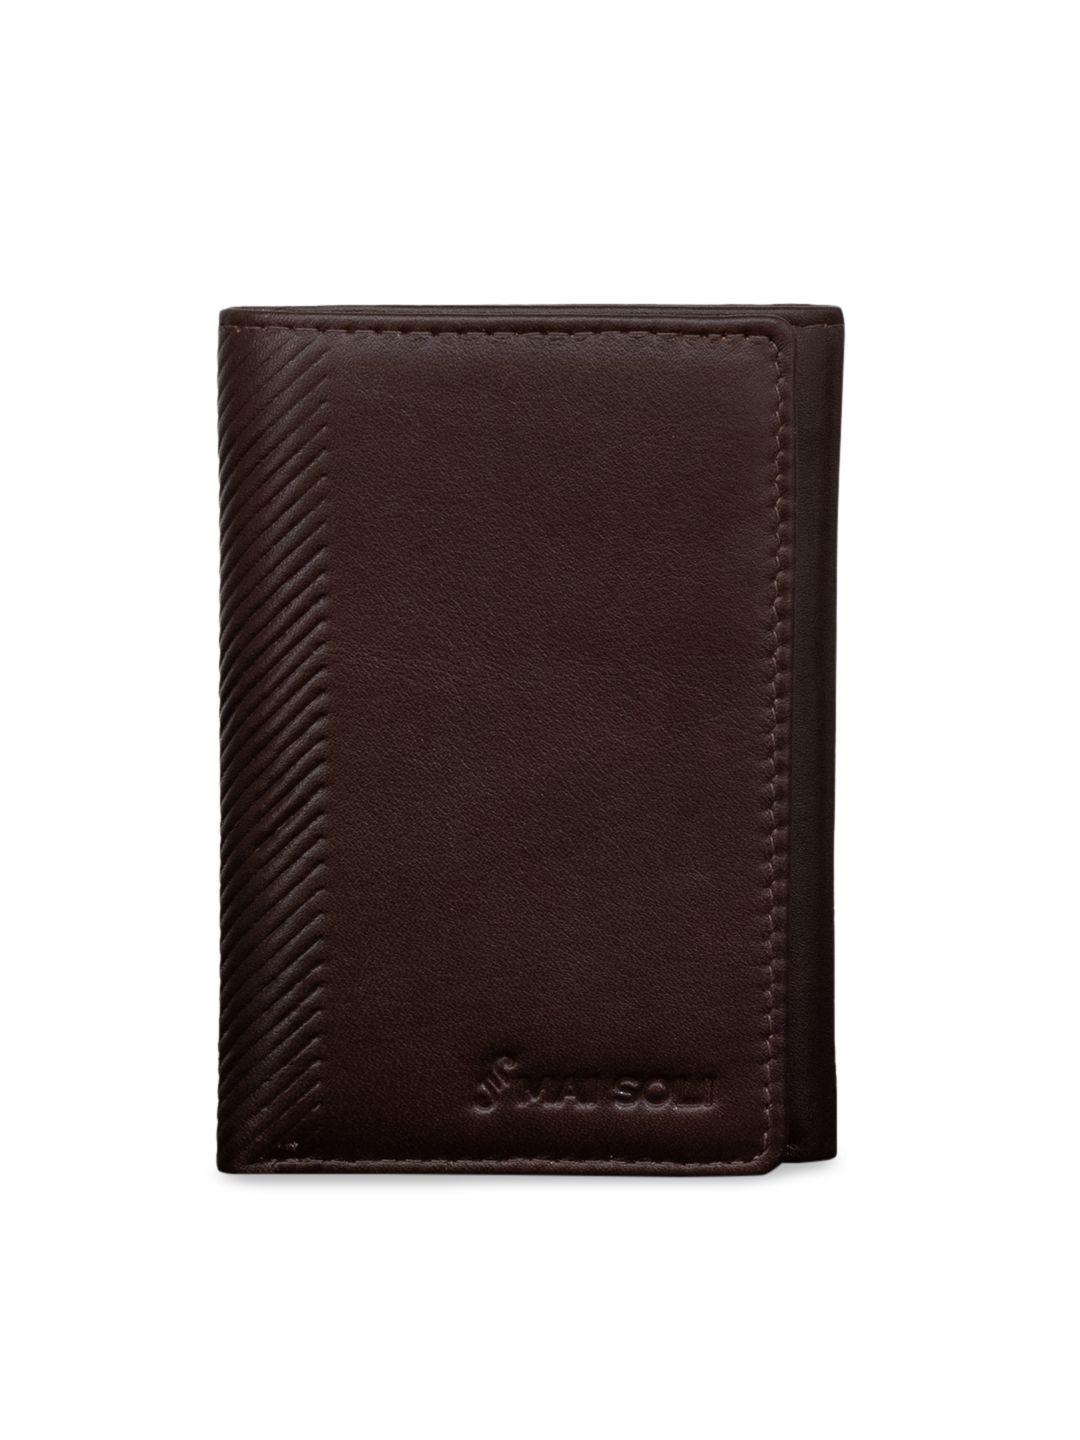 mai soli men brown solid leather three fold wallet